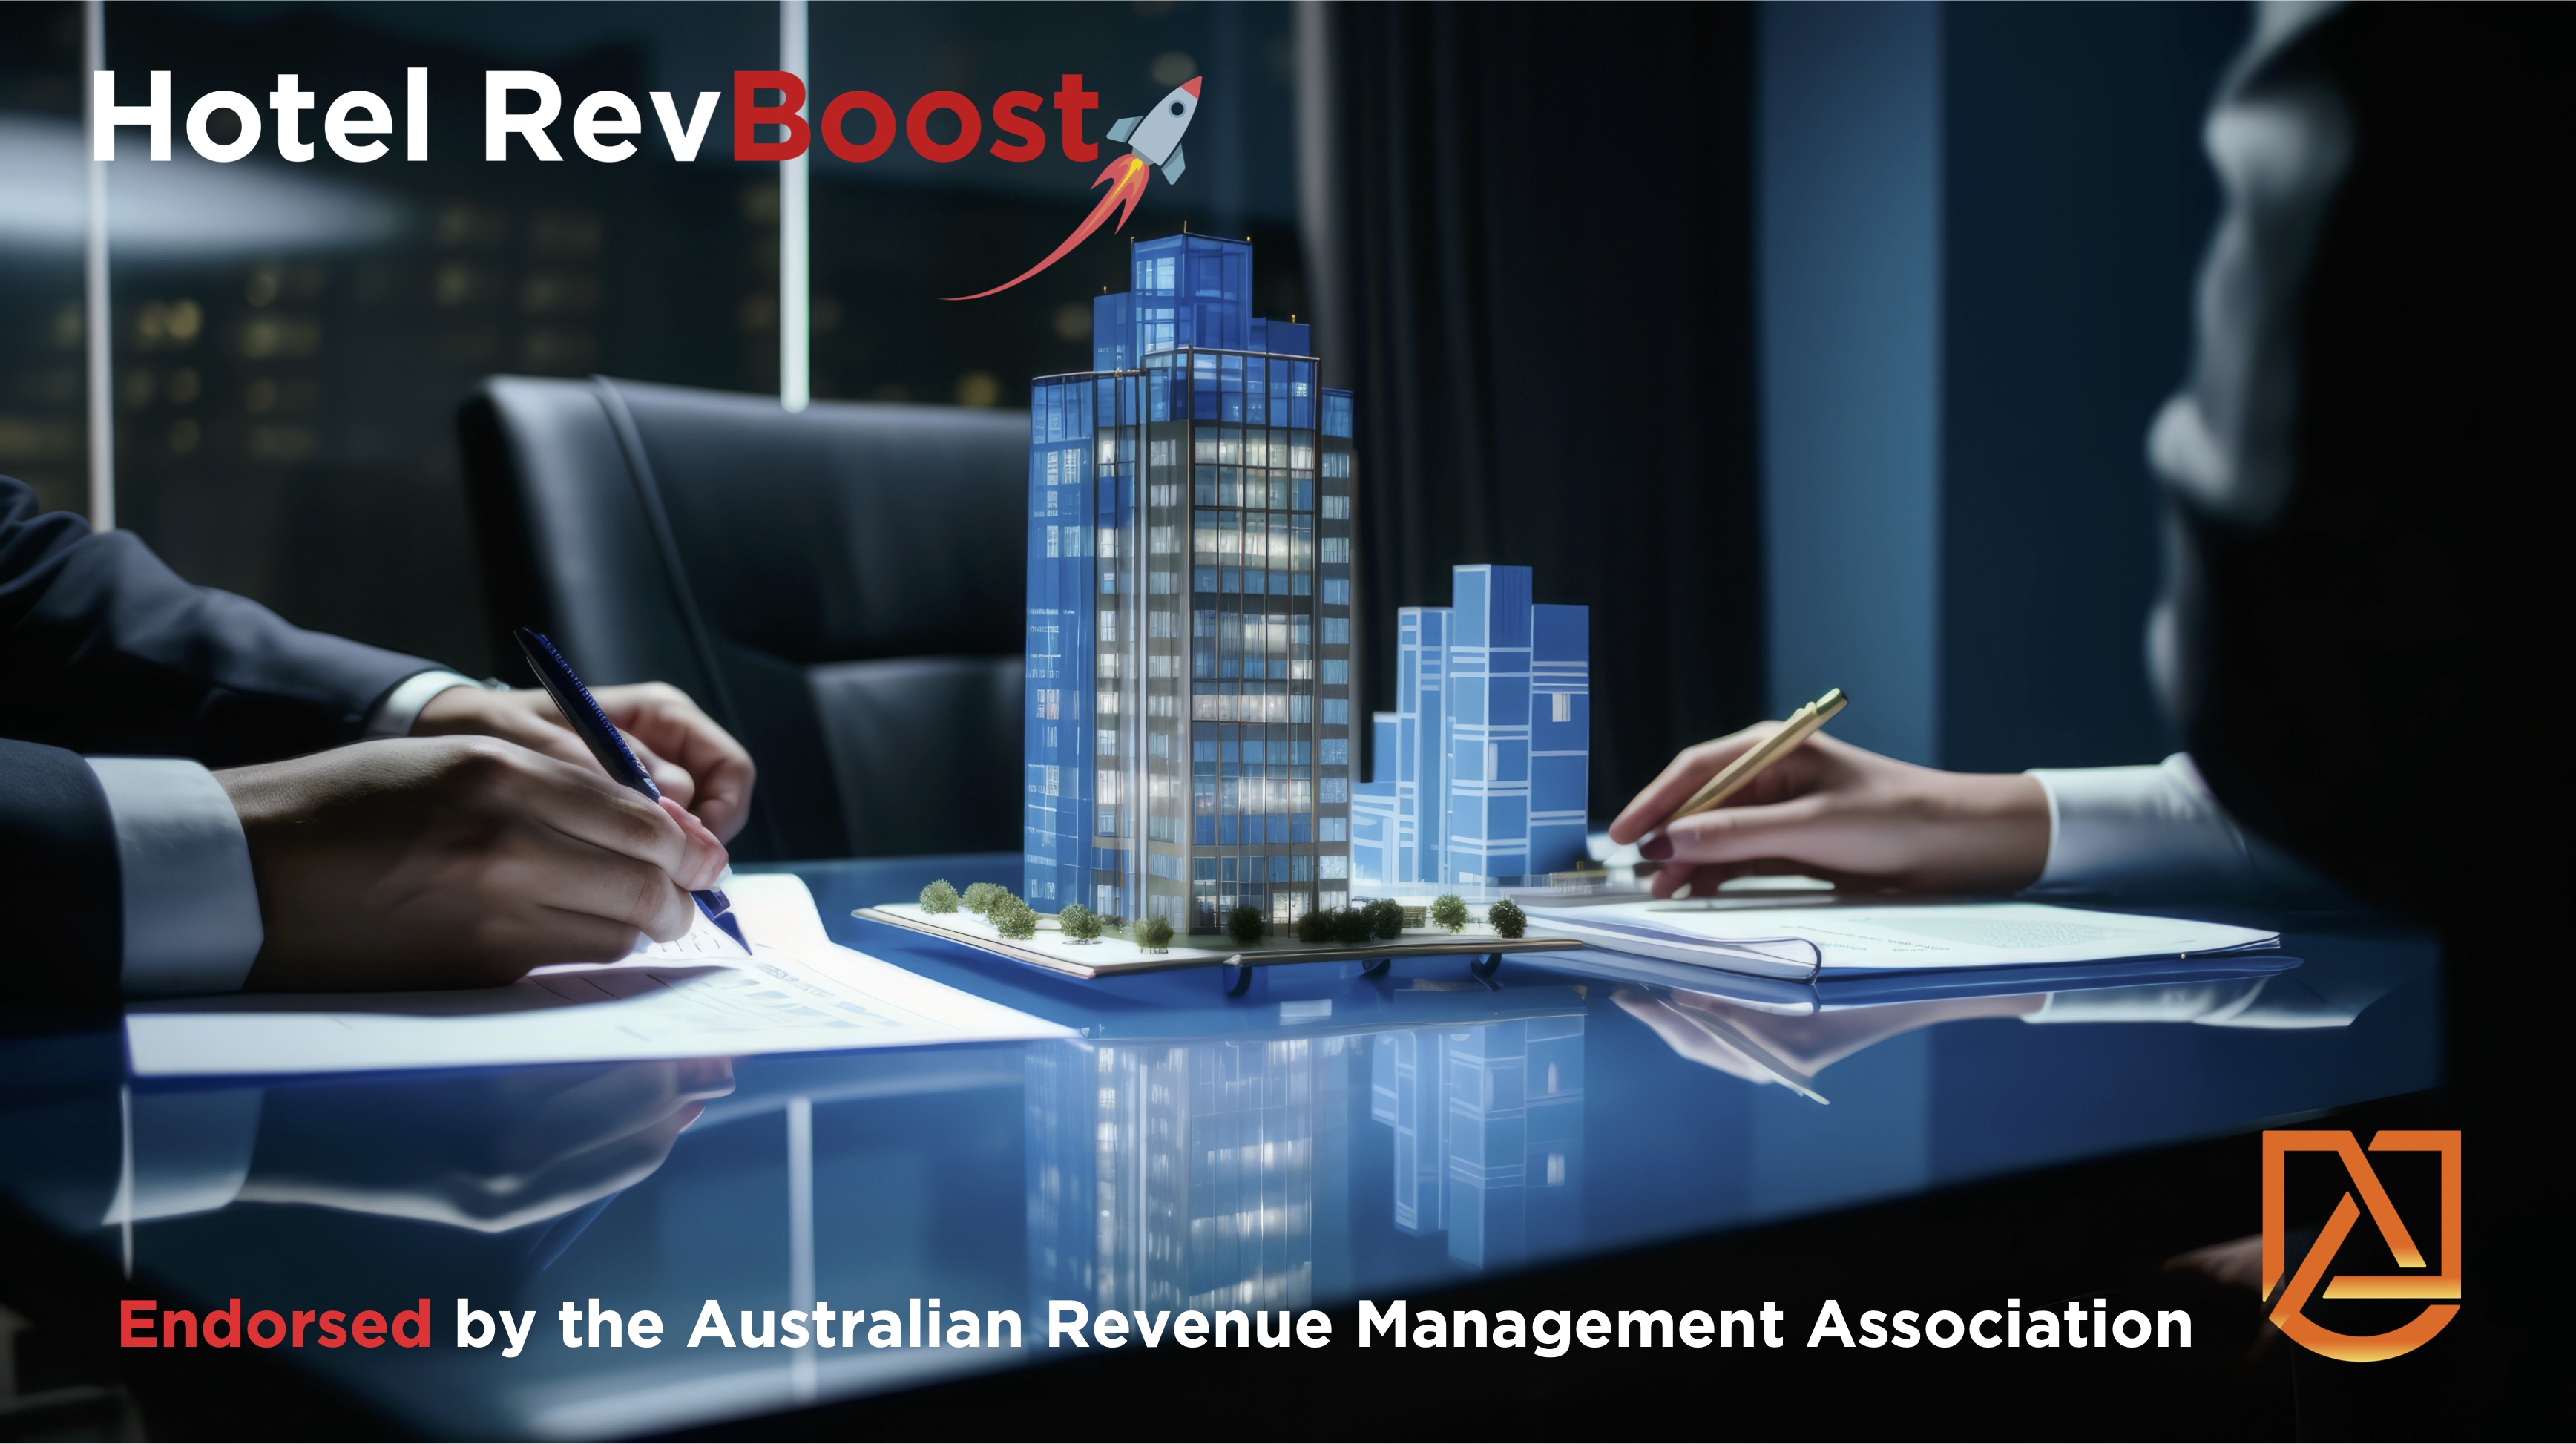 ARMA - Australian Revenue Management Association's seal of approval meets Hotel RevBoost's cutting-edge software solutions, powered by Intellisoftware's pursuit of AI-driven excellence in hospitality management.